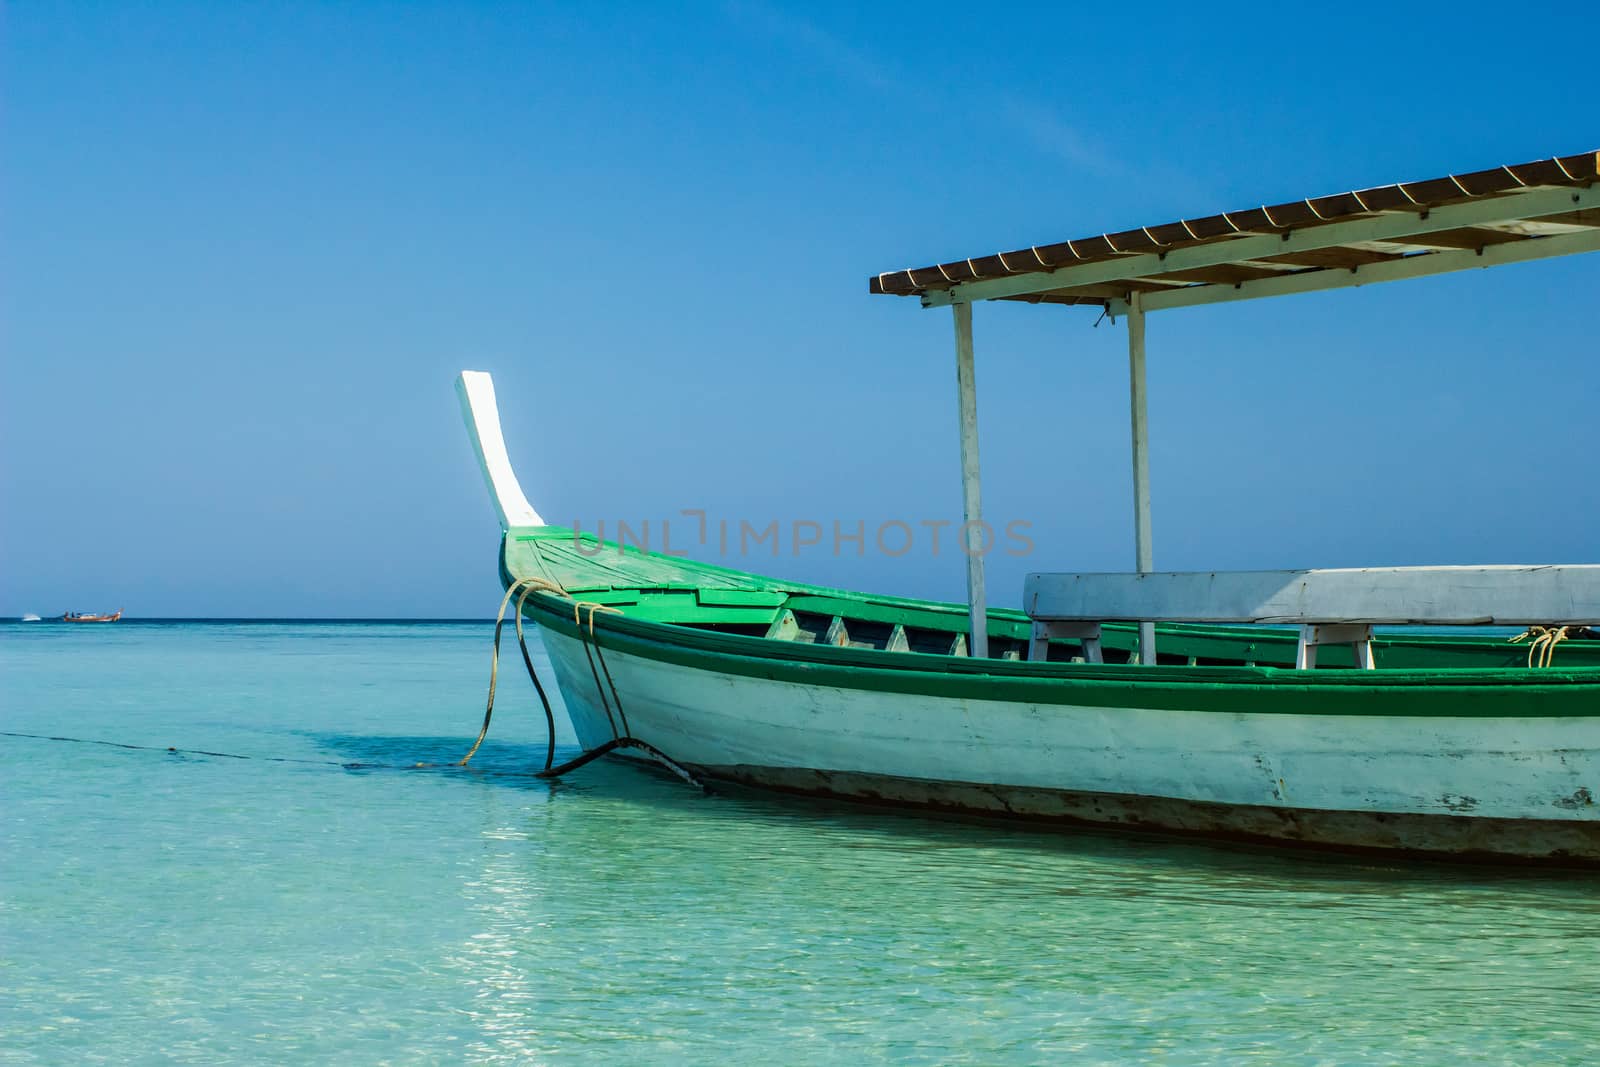 Beautiful small fishing wooden boat located in blue sea and sky